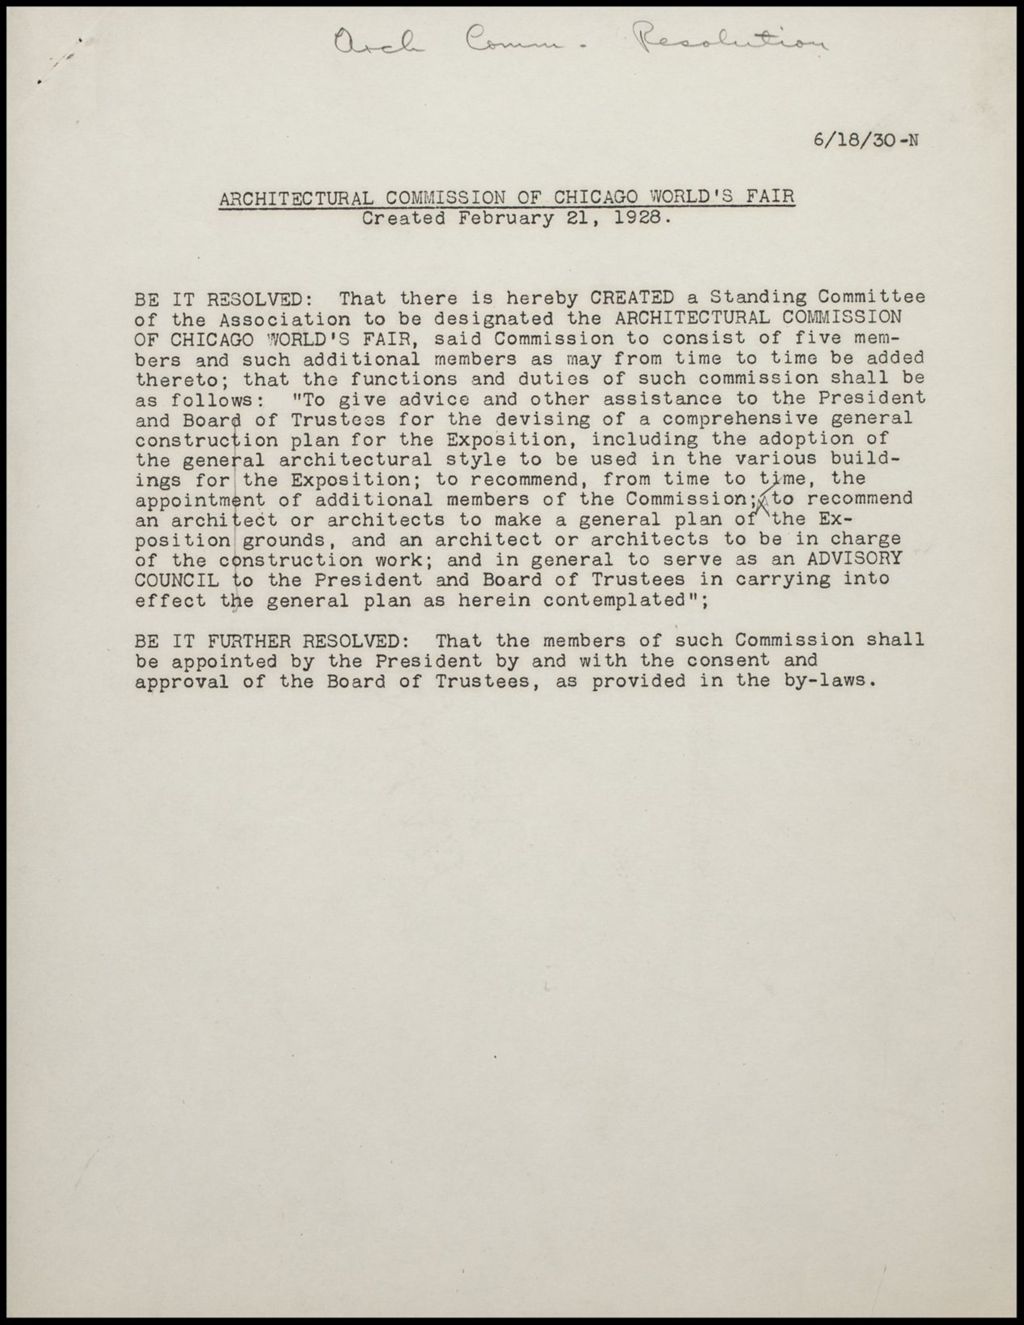 Architectural Committee - resolutions, ca. 1933-1934 (Folder 5-44)